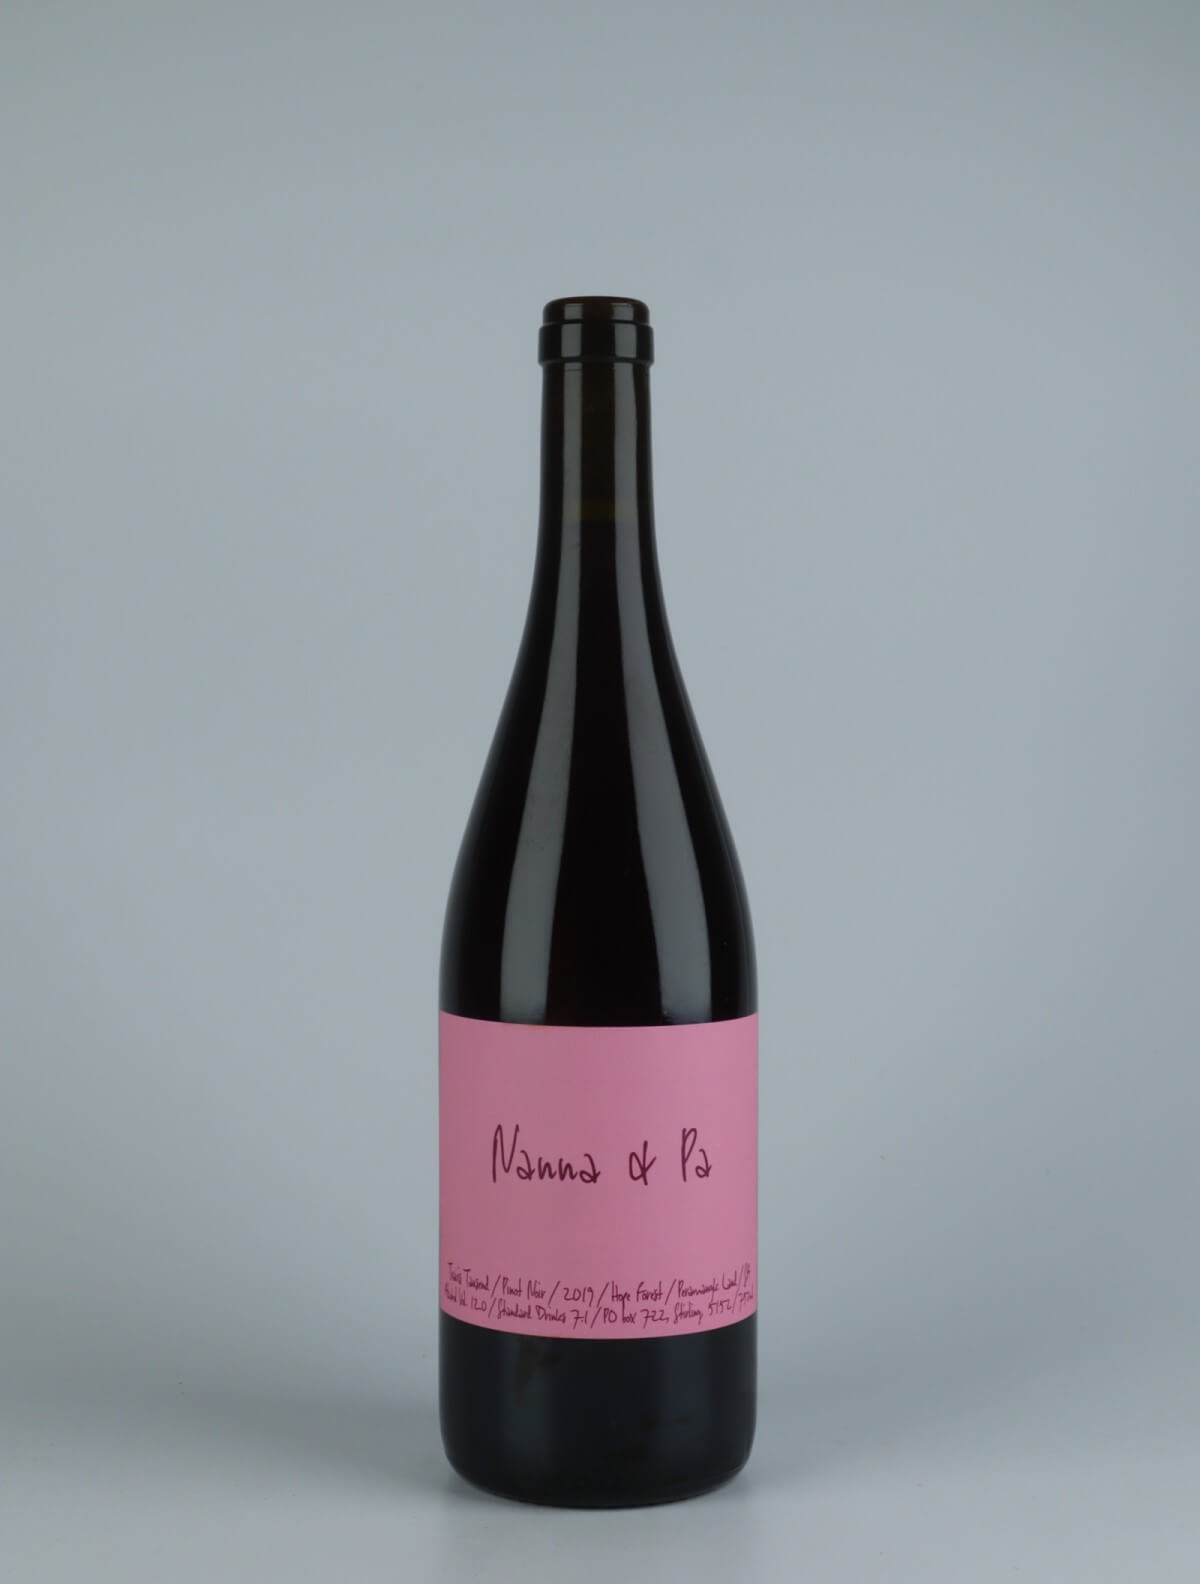 A bottle 2019 Nanna & Pa Pinot Noir Red wine from Travis Tausend, Adelaide Hills in 